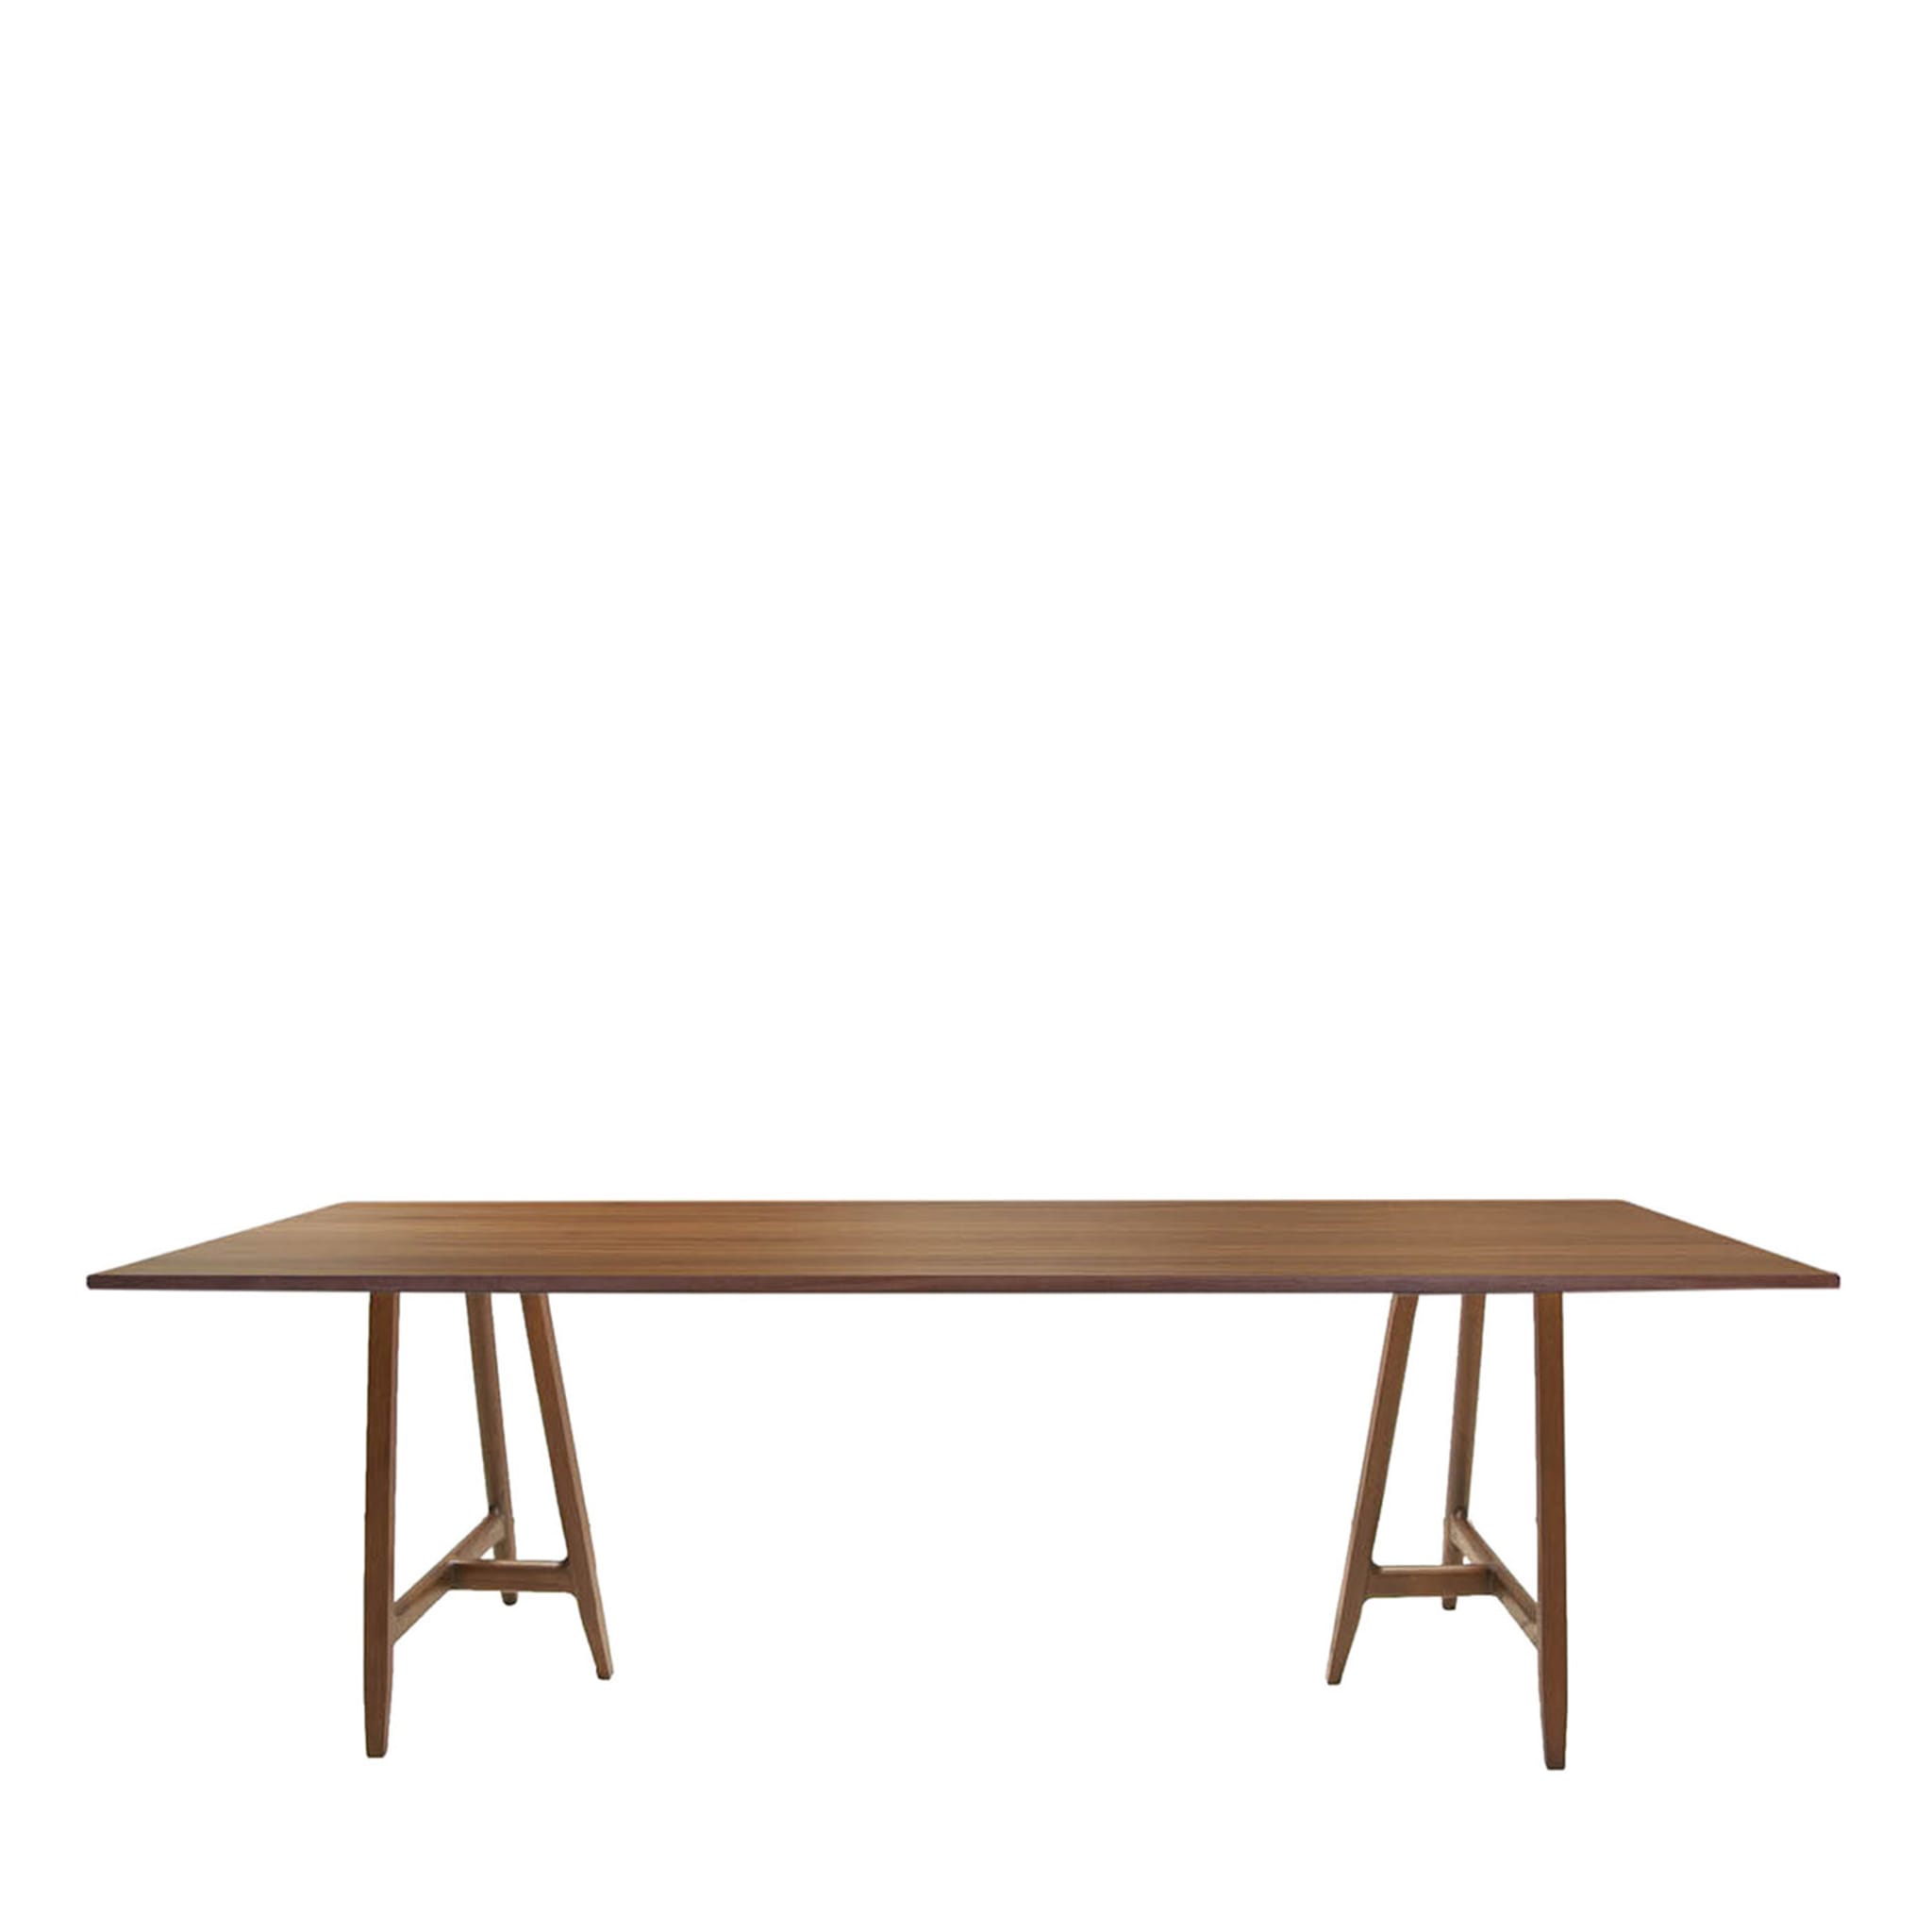 Easel Walnut Table by Ludovica + Roberto Palomba - Main view